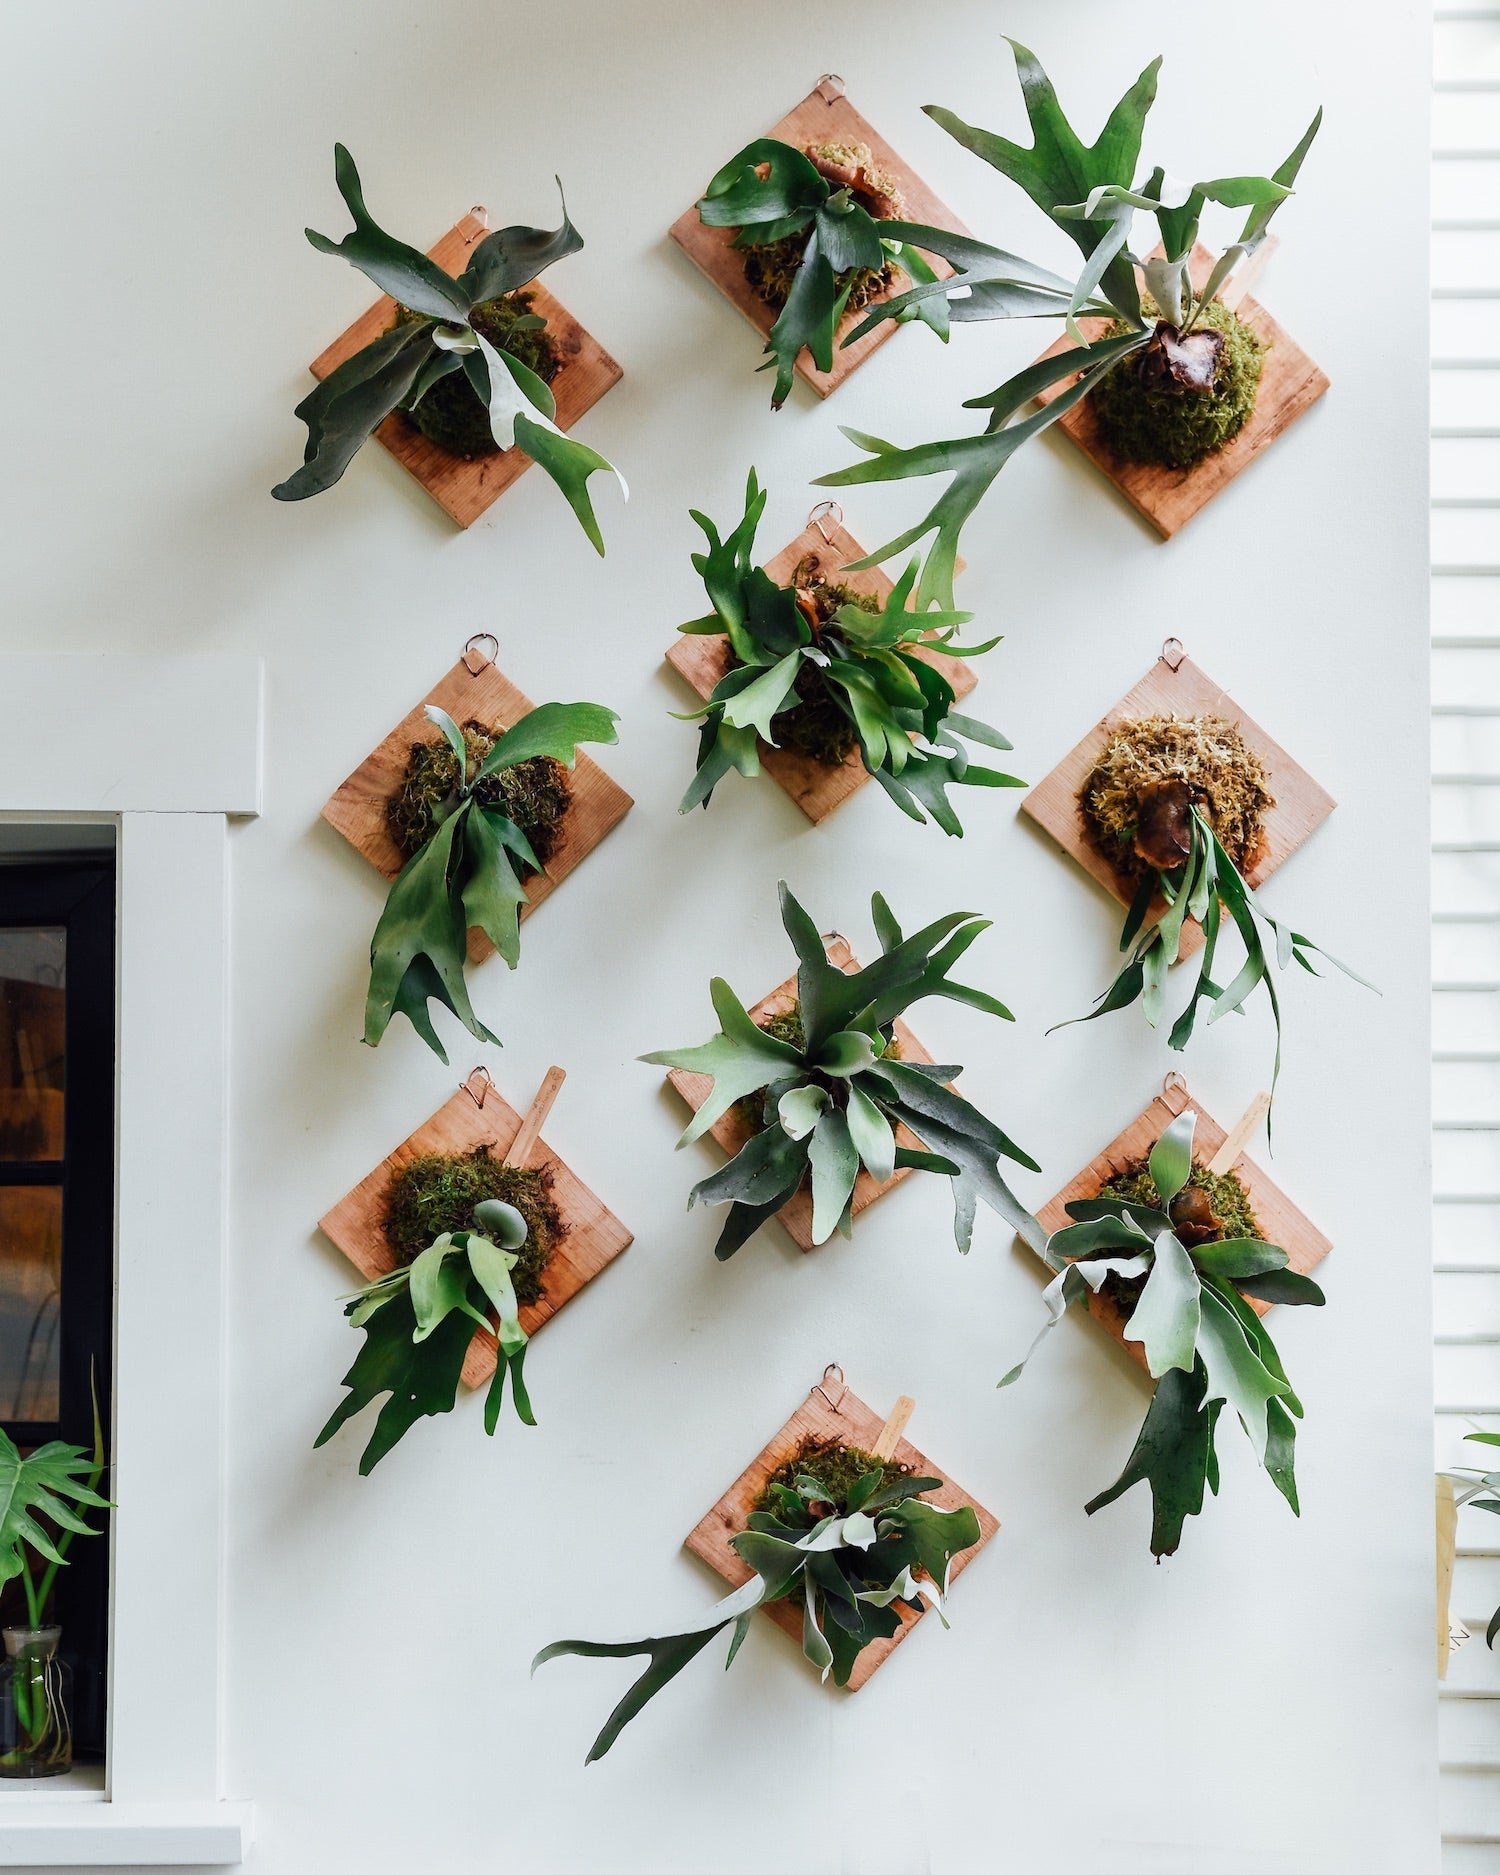 How to Water Mounted Staghorn Fern